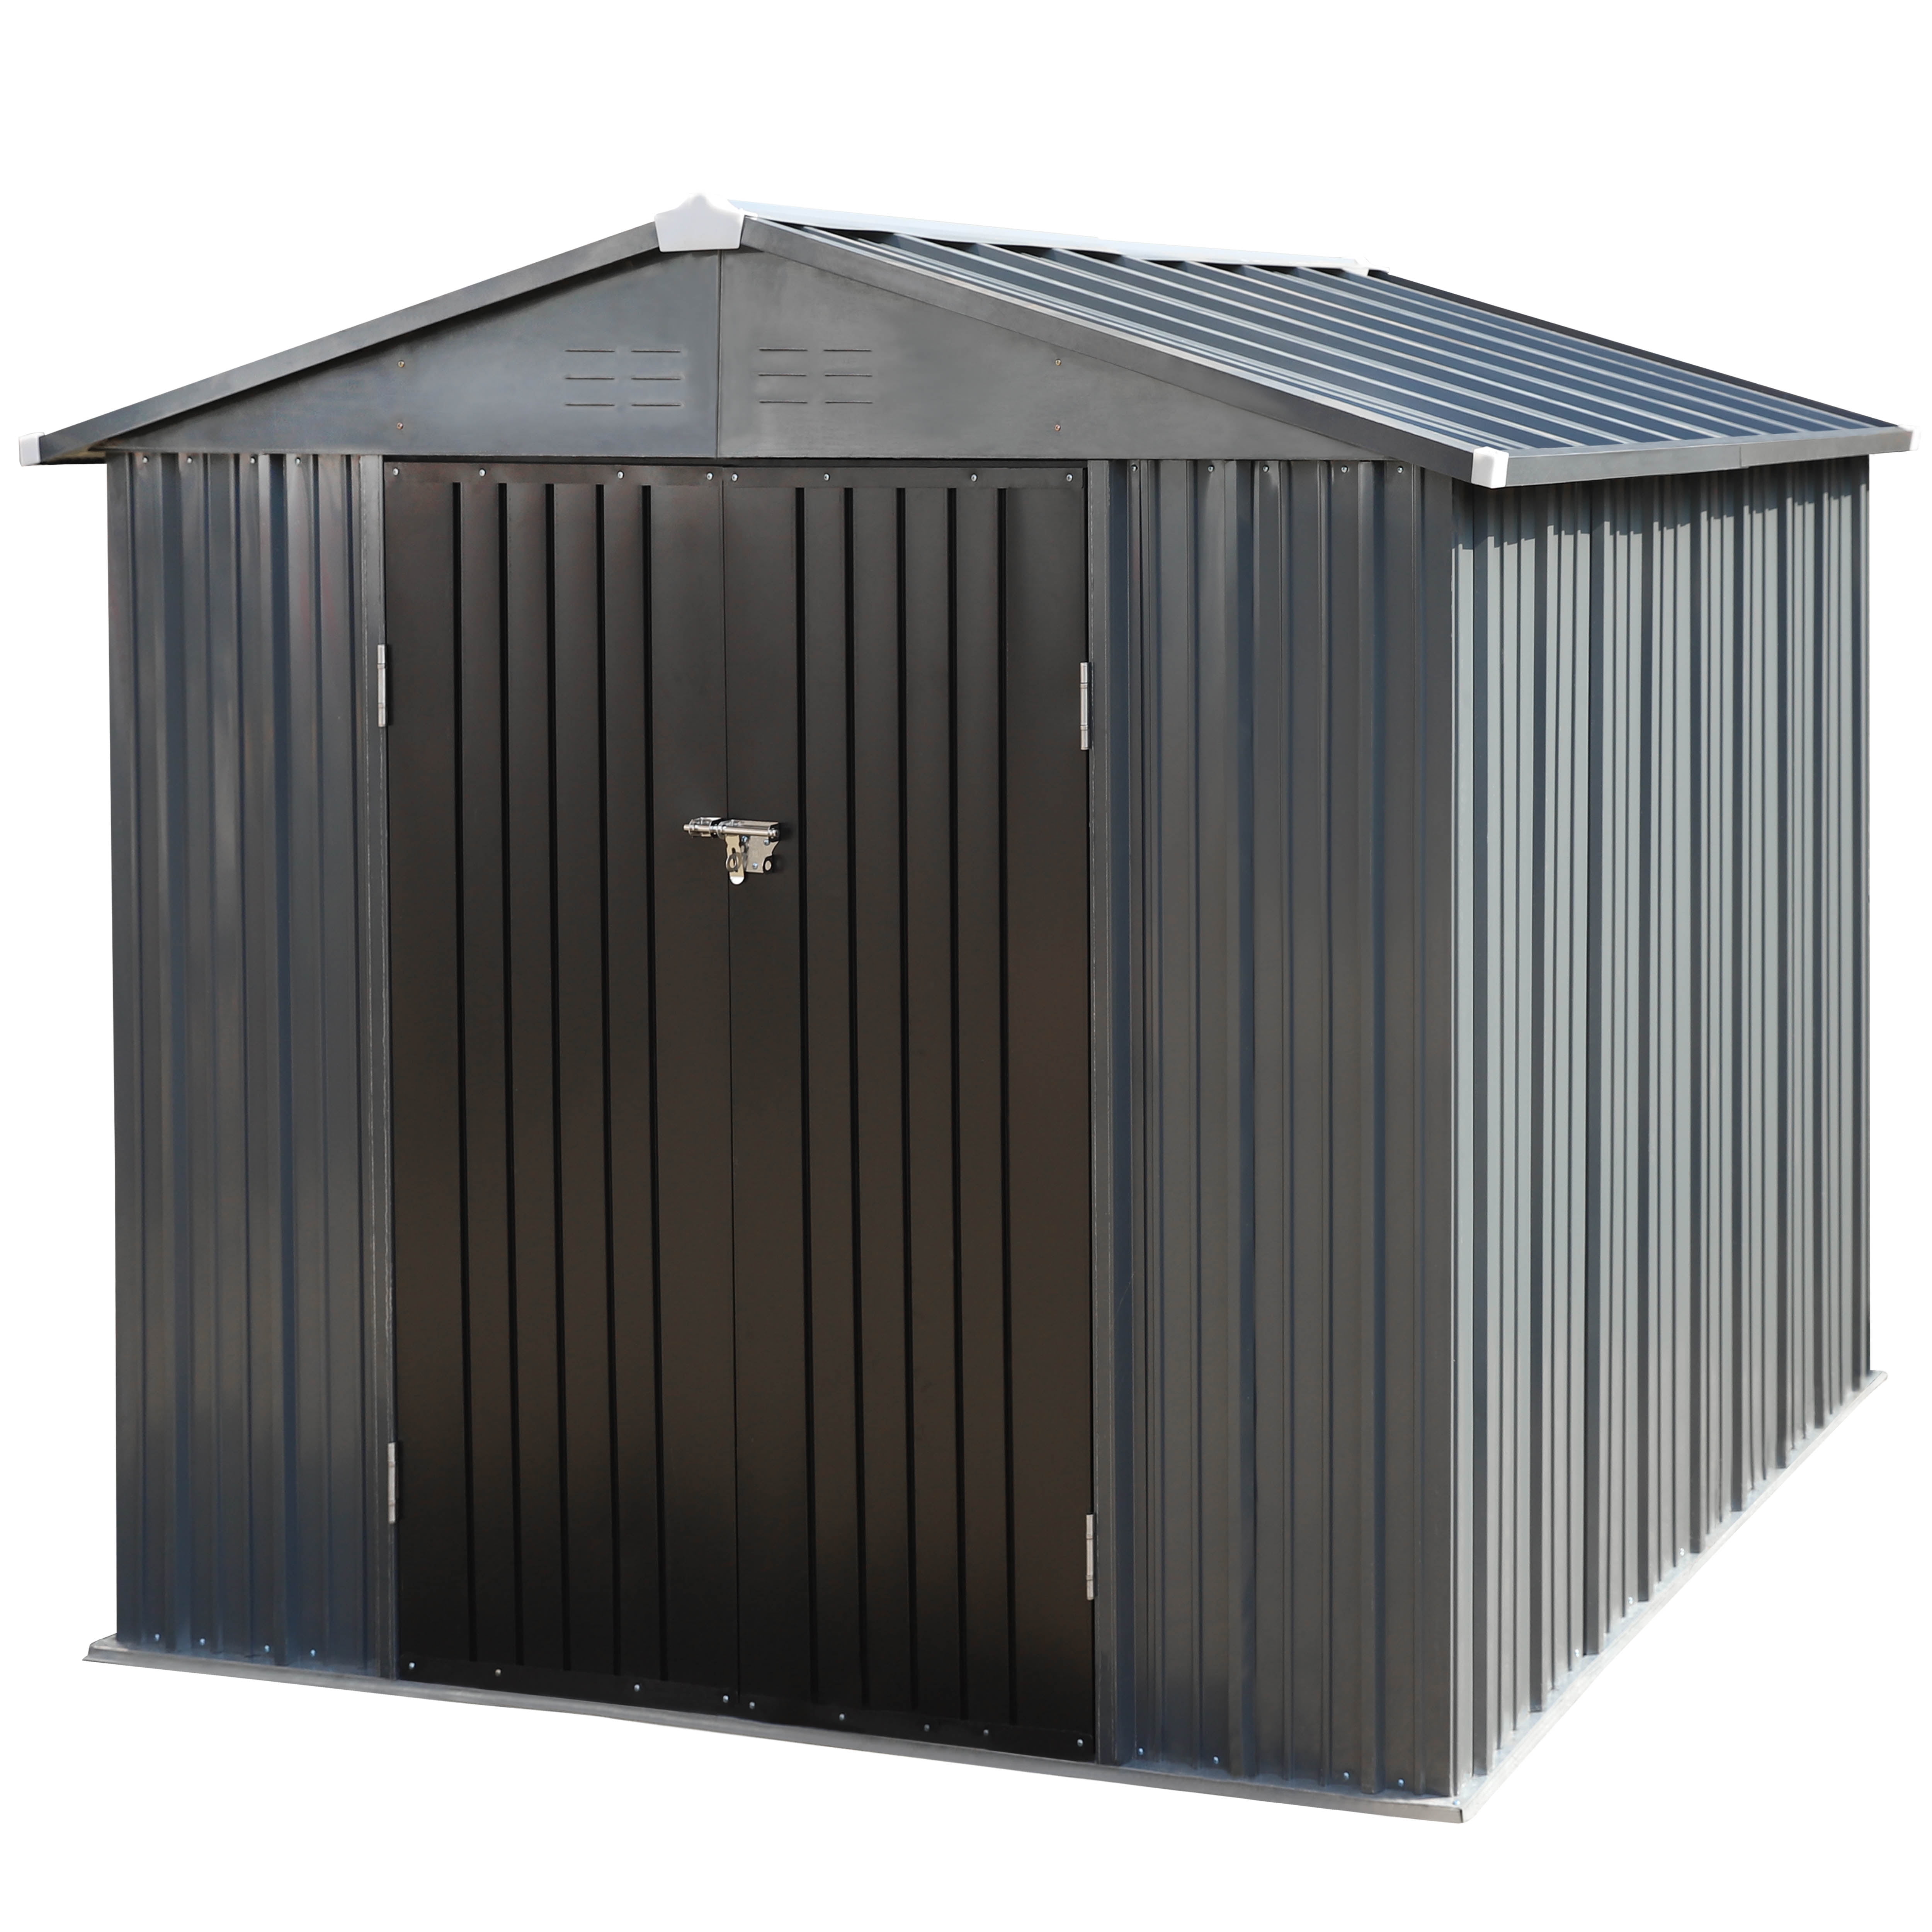 Log Store Wooden Outdoor Garden Shed W-1190mm x H-1260mm x D-810mm *Clearance* 